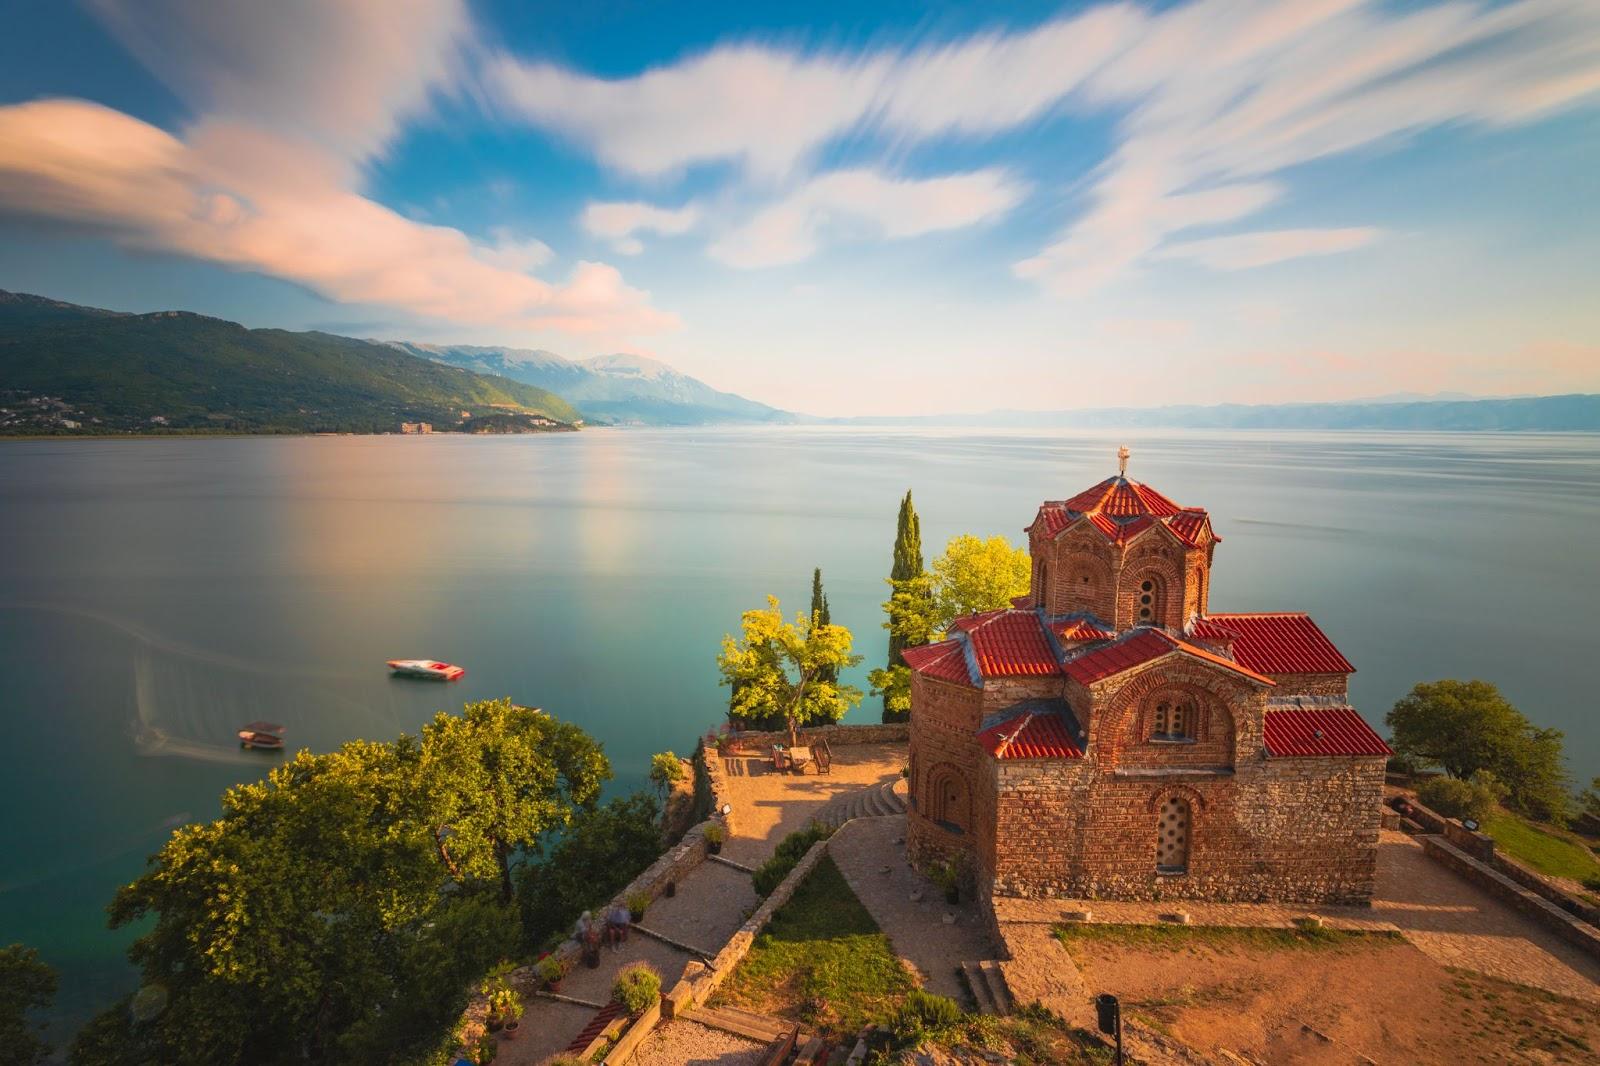 Saint John the Theologian, Kaneo situated on the cliff over Kaneo Beach overlooking Lake Ohrid in the city of Ohrid, North Macedonia.